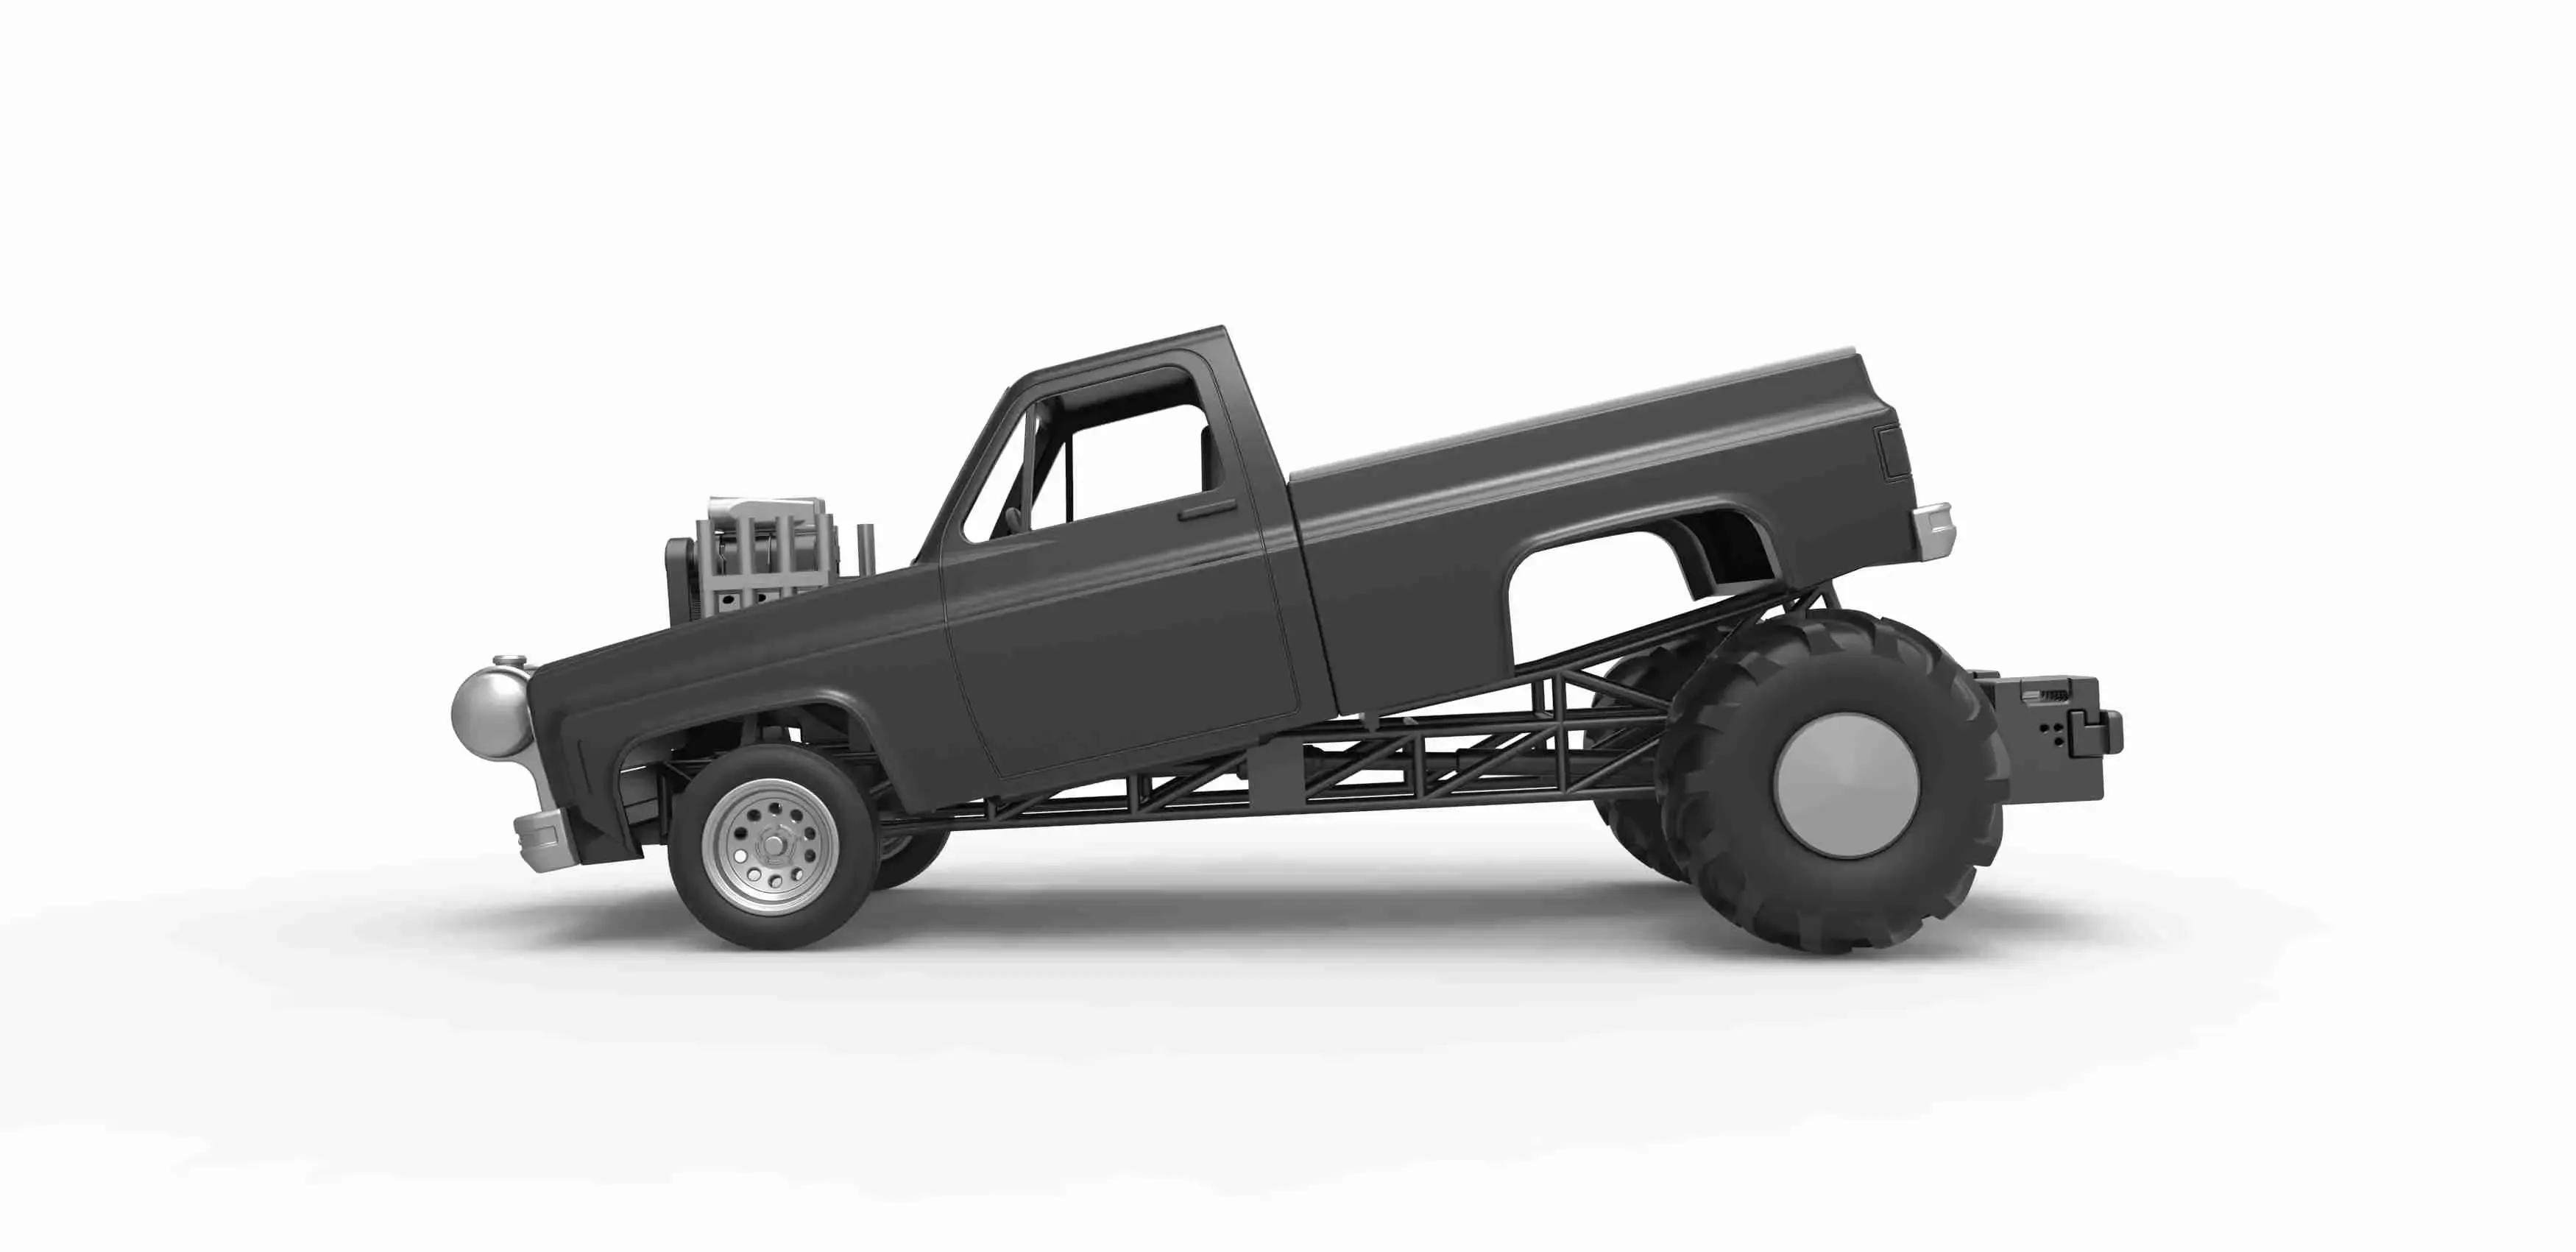 Old school pulling truck 2wd Scale 1:25